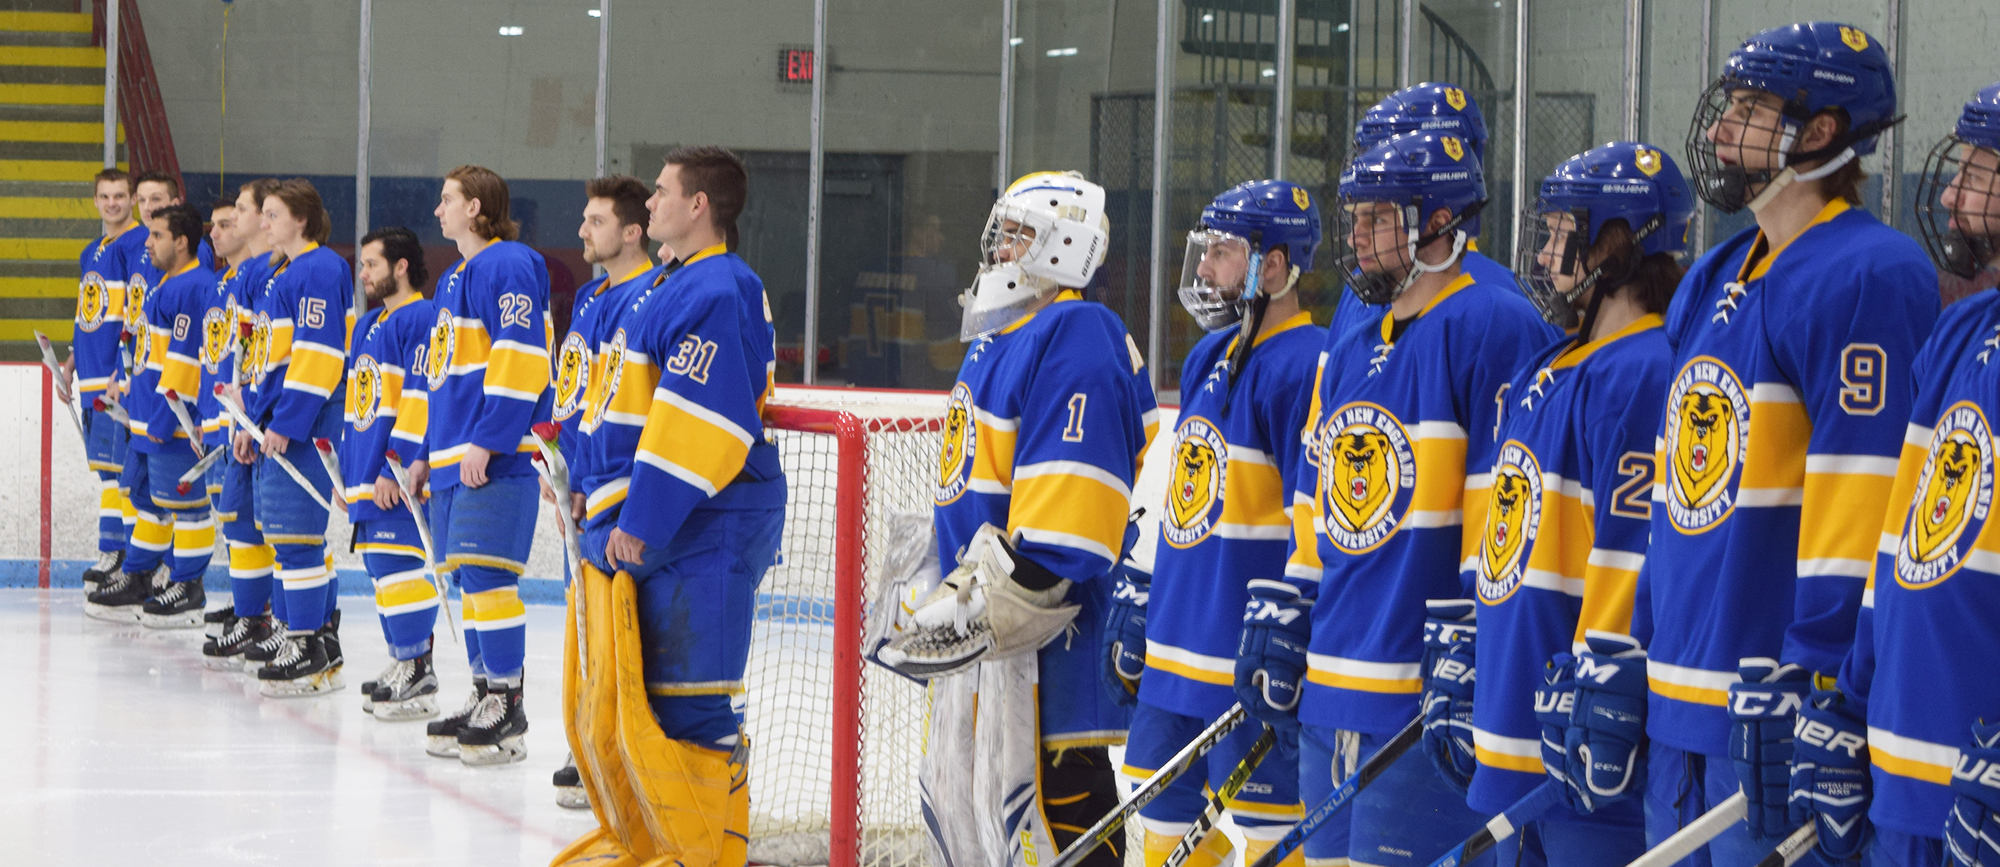 Western New England Falls to Curry on Senior Night, 5-1